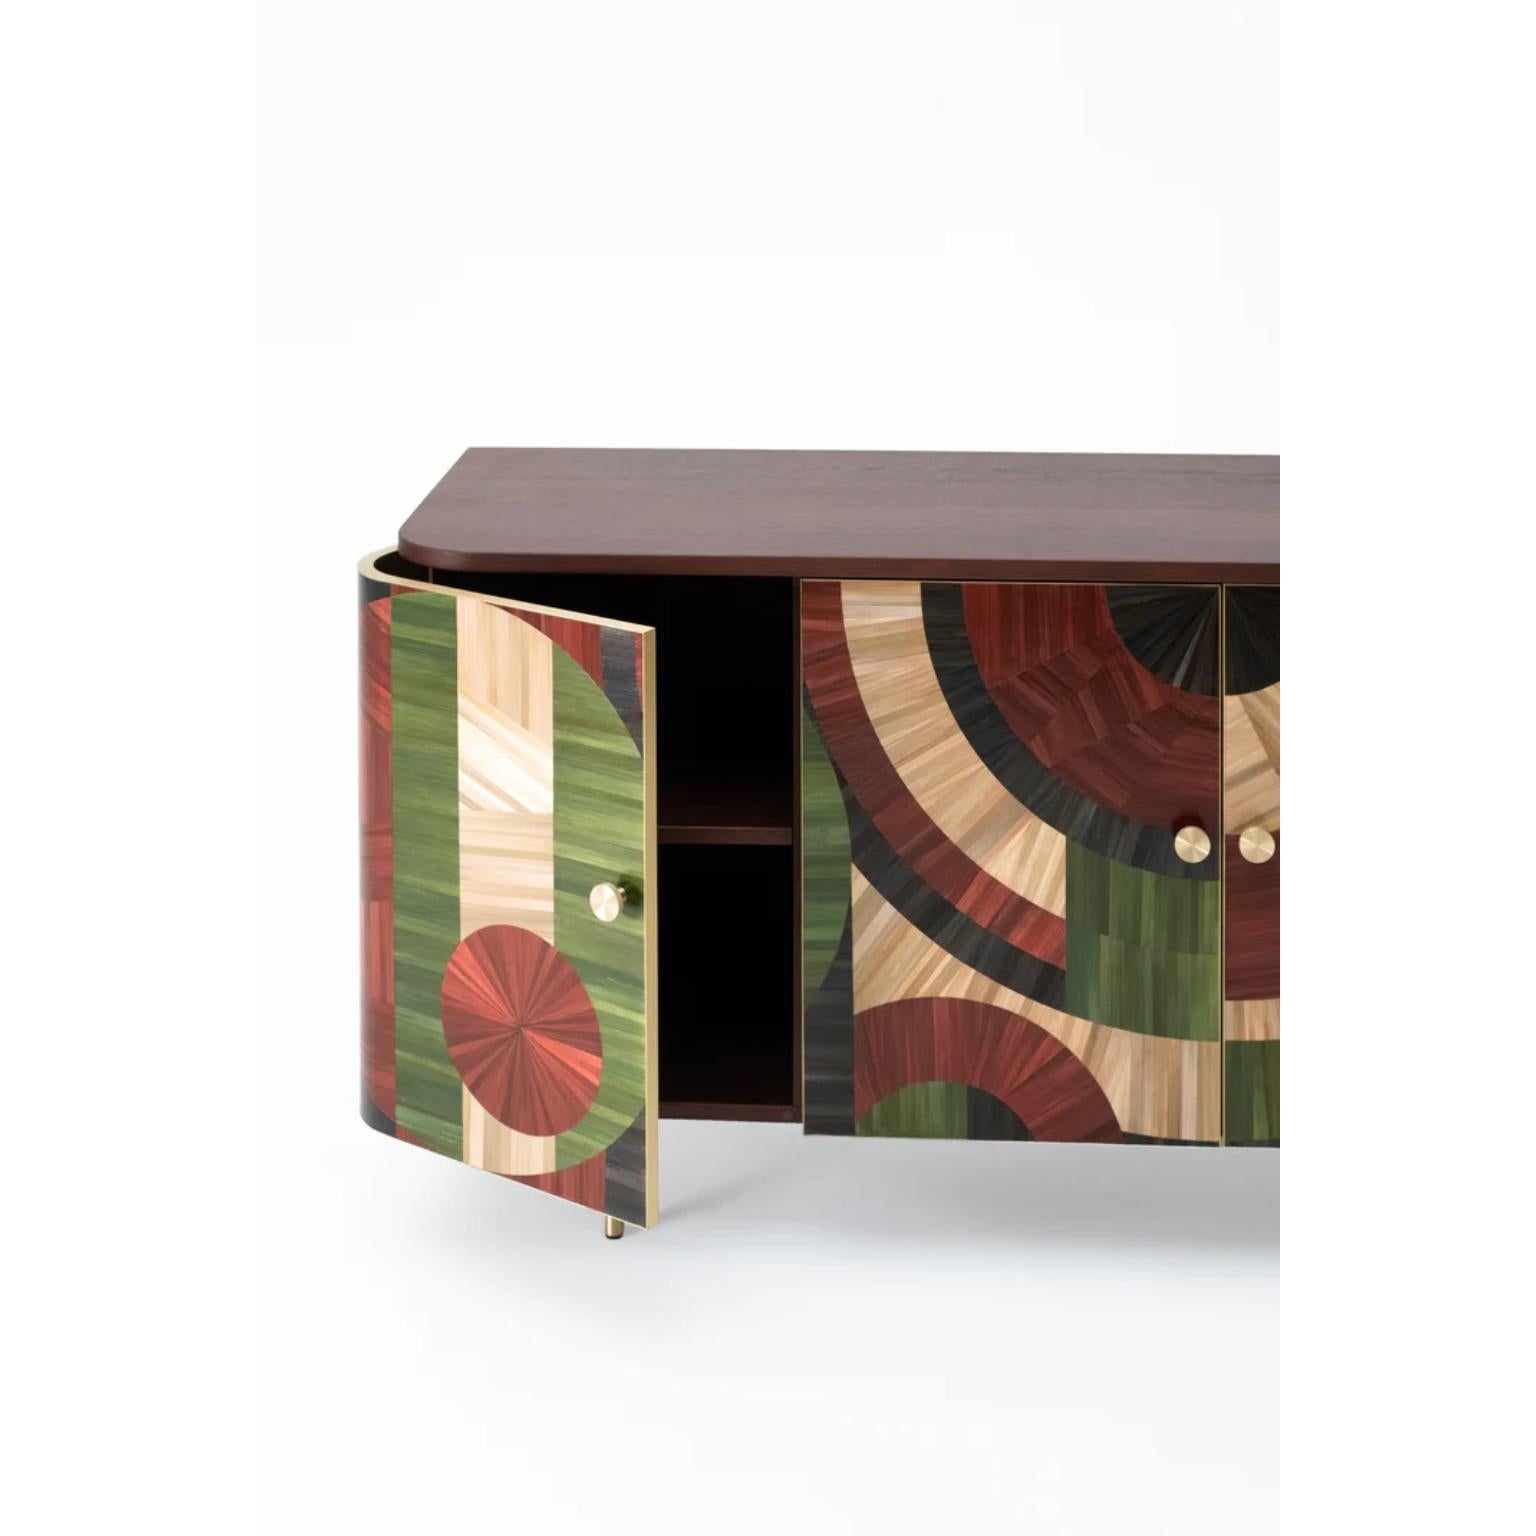 Other Solomia 3 Cabinet by Ruda Studio For Sale